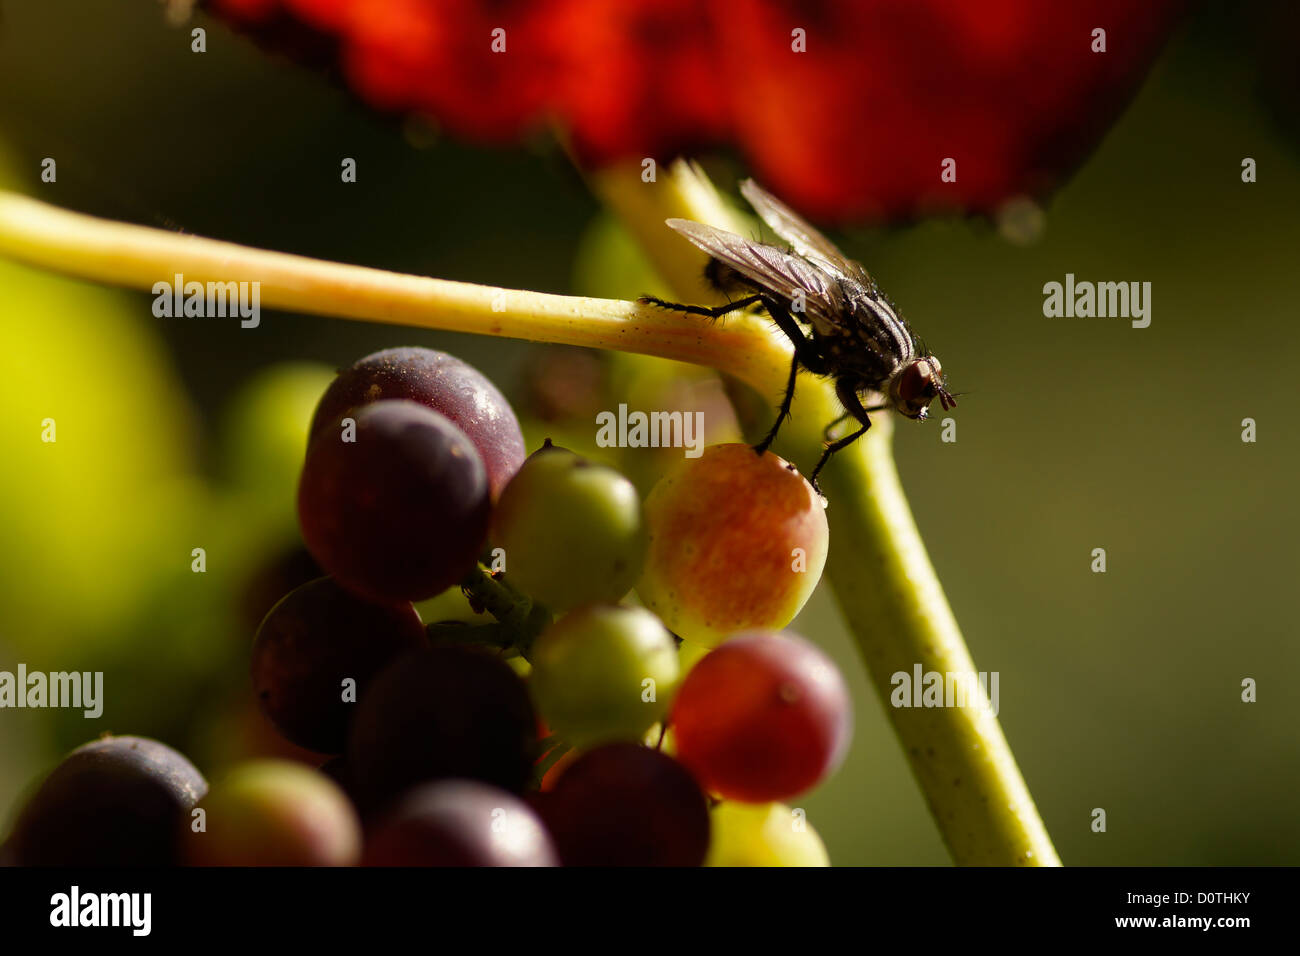 The Fly and the wine Stock Photo